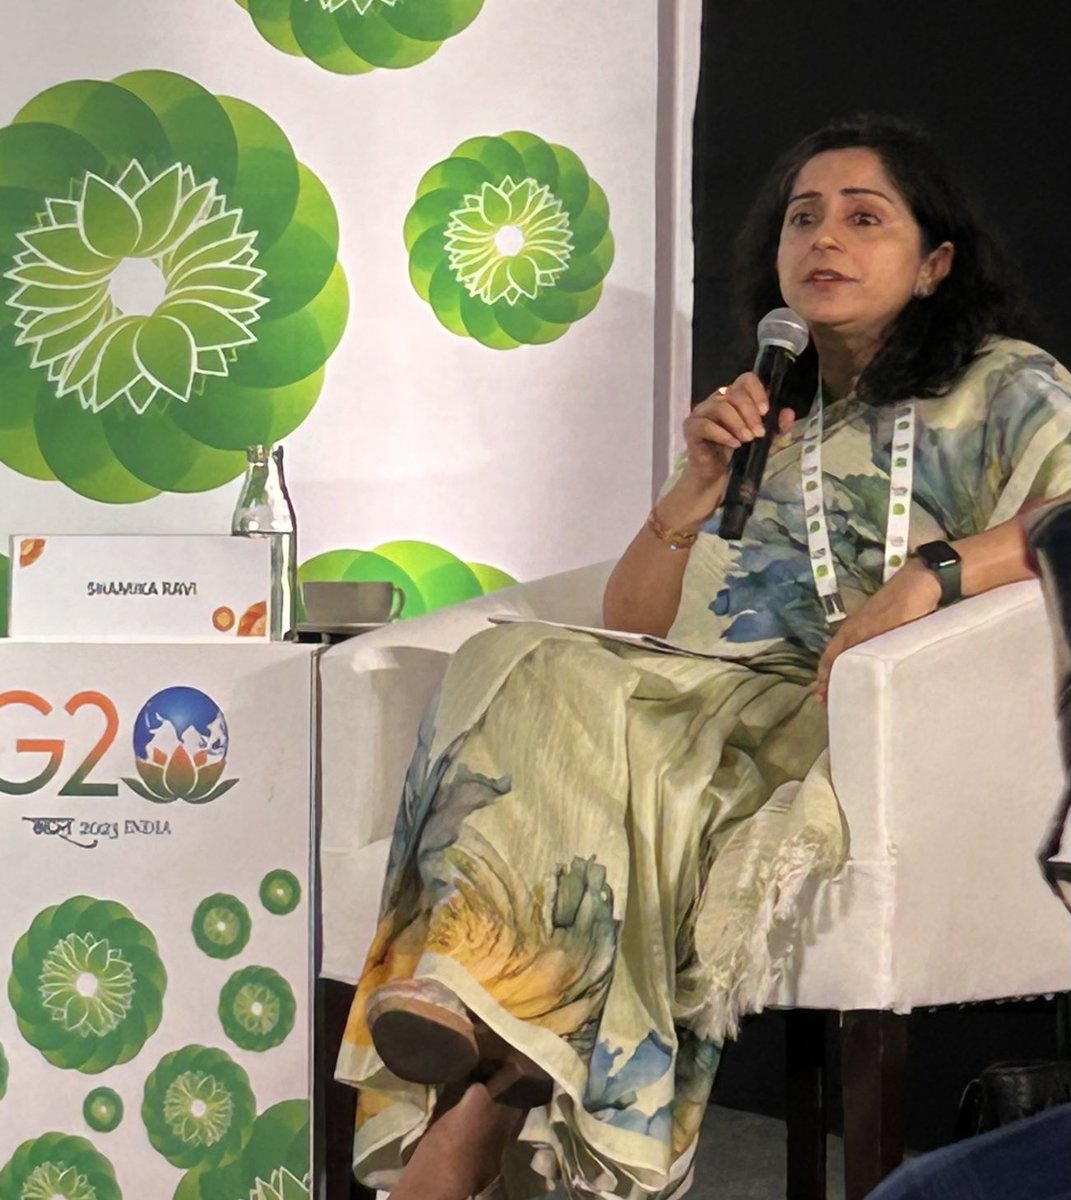 ⁦@ShamikaRavi⁩ masterfully conducting an impt panel discussion ahead of the 2nd #G20 #Sherpa meeting on #GreenDevelopment organised by ⁦@g20org⁩, together with ⁦@orfonline⁩ ⁦@UNinIndia⁩.
Such a pleasure to see a gender balanced panel 👍🏽